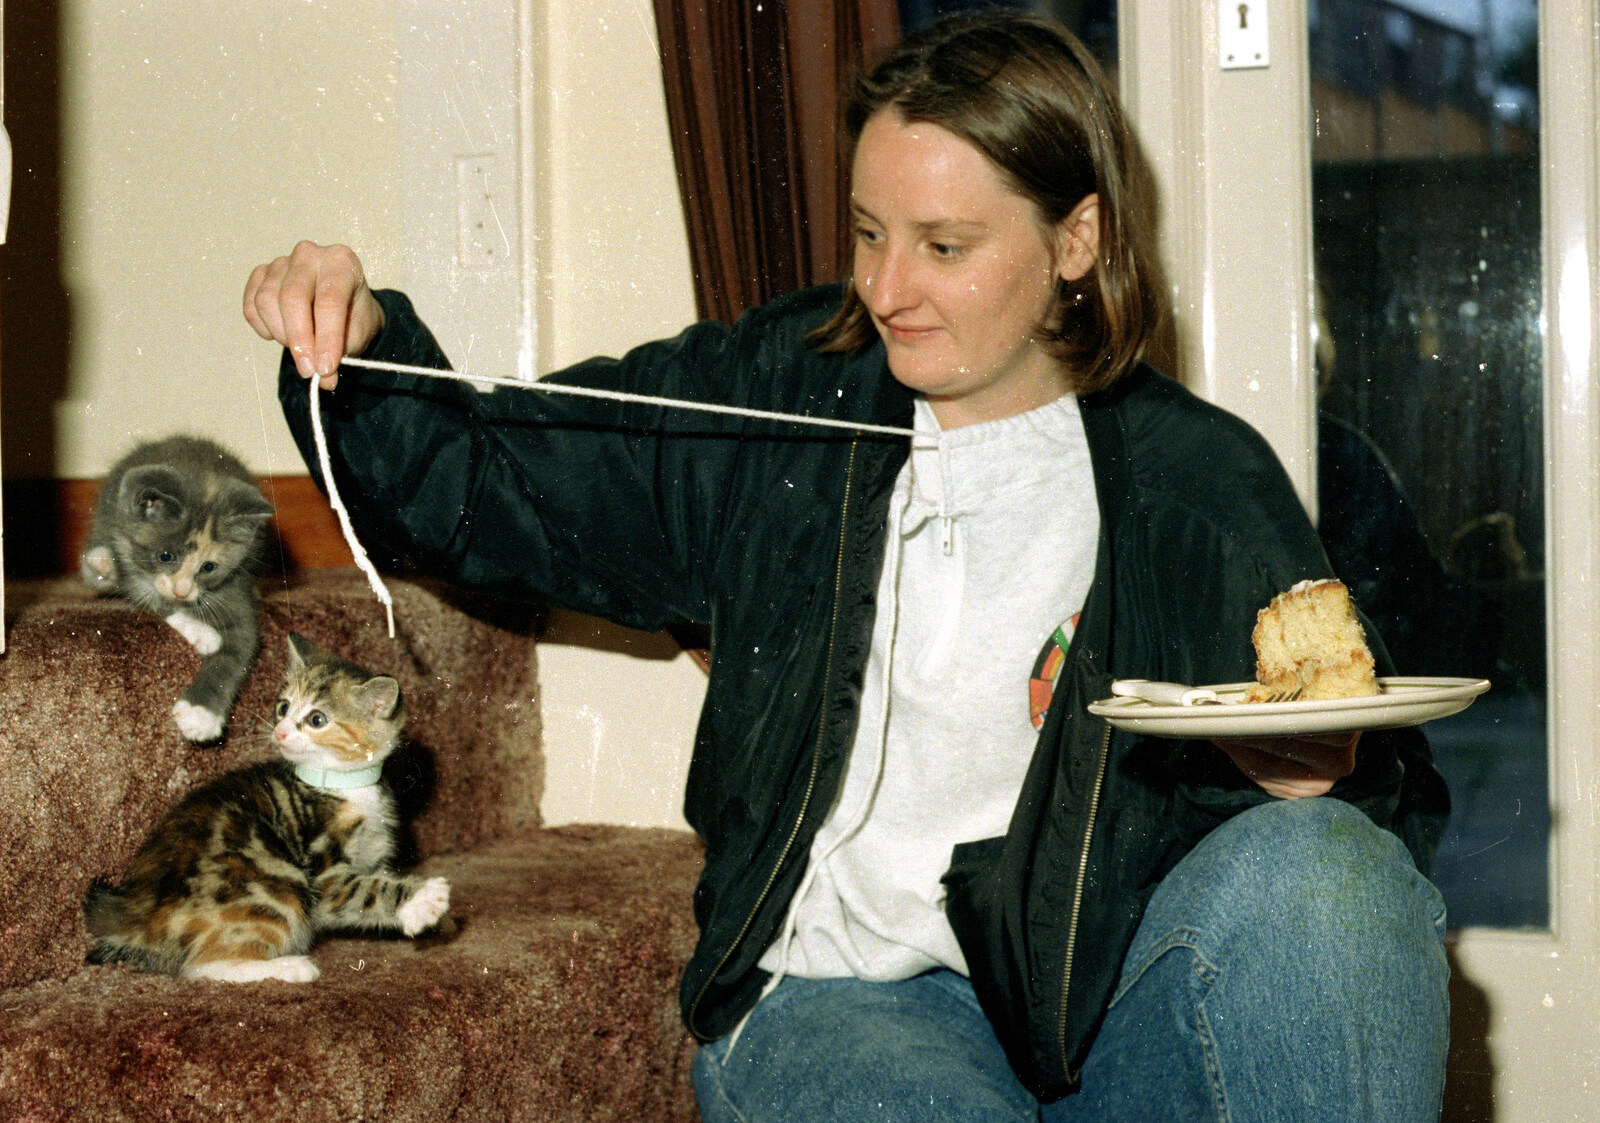 Jo balances a plate of cake from House Renovation Randomness and a Spot of Lightning, Brome, Suffolk - 19th June 1994